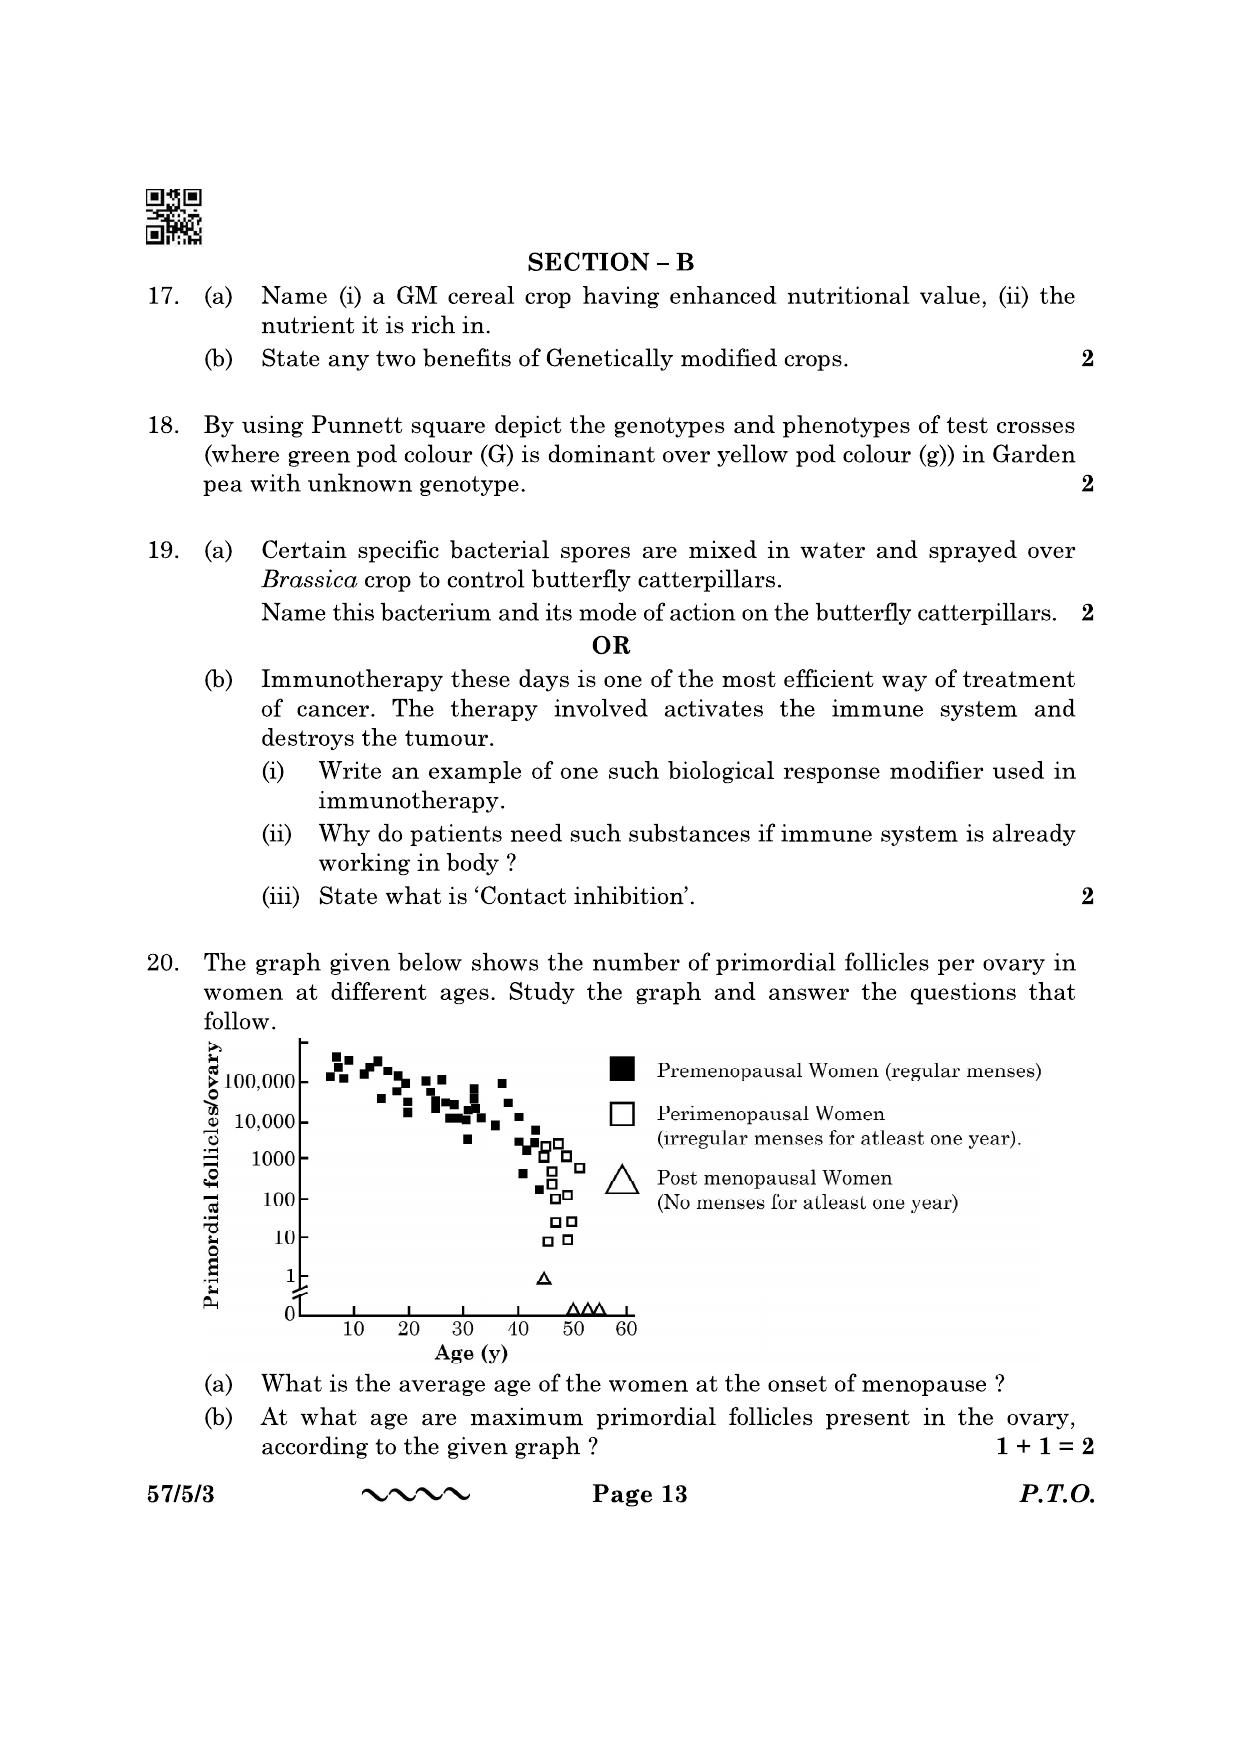 CBSE Class 12 57-5-3 Biology 2023 Question Paper - Page 13